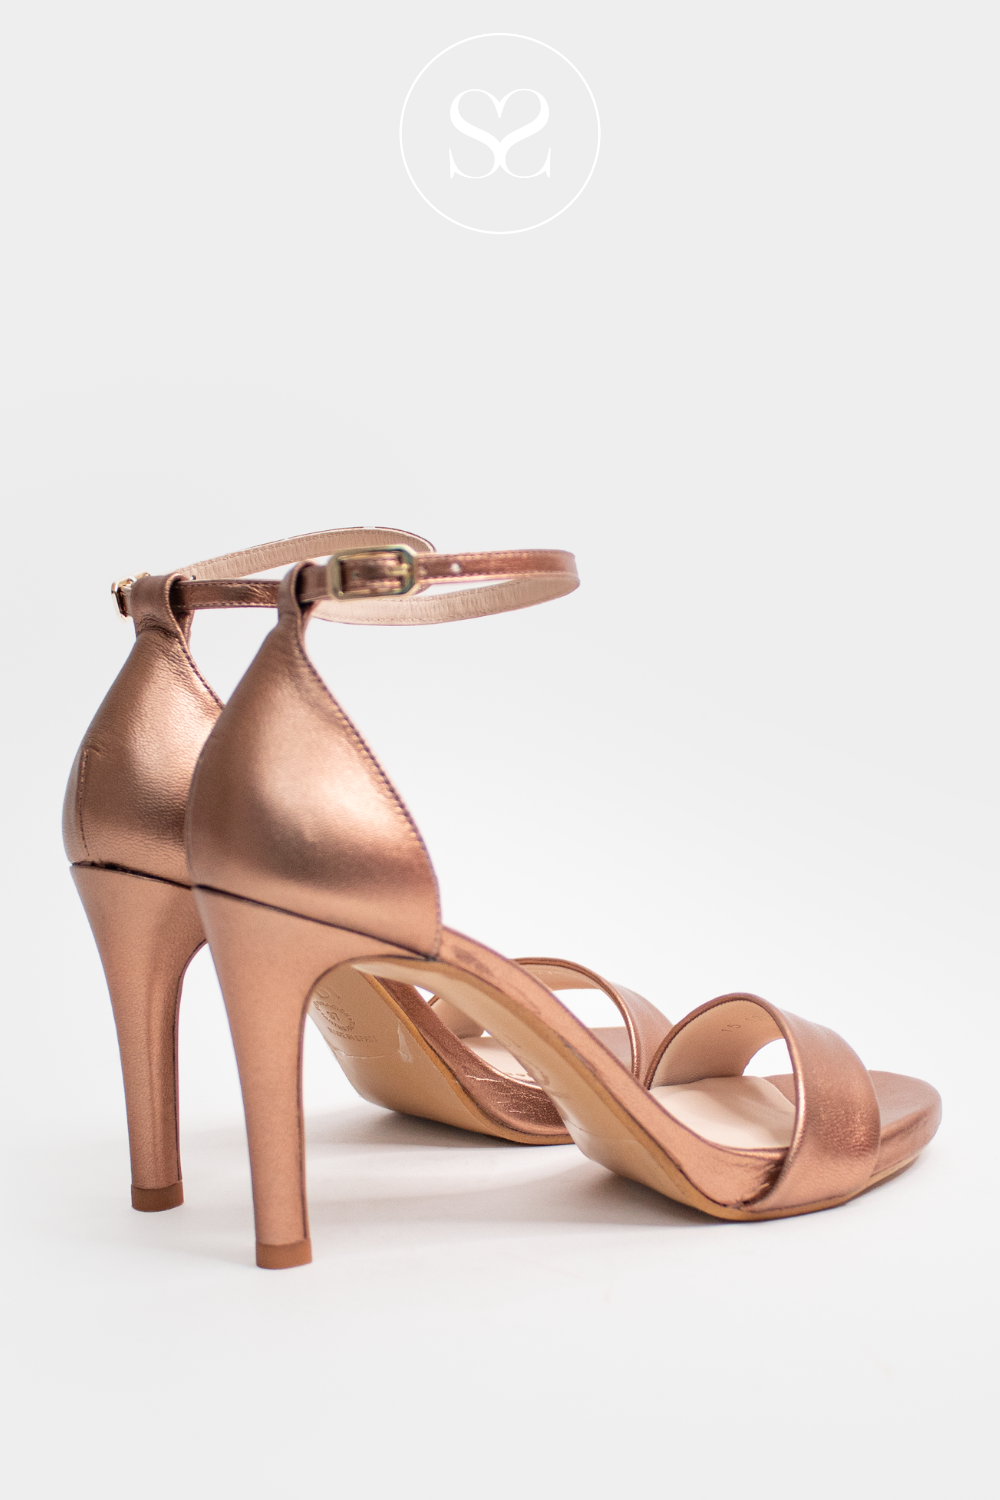 ROSE GOLD HIGH HEEL SANDALS FROM LODI, BARELY THERE STYLE